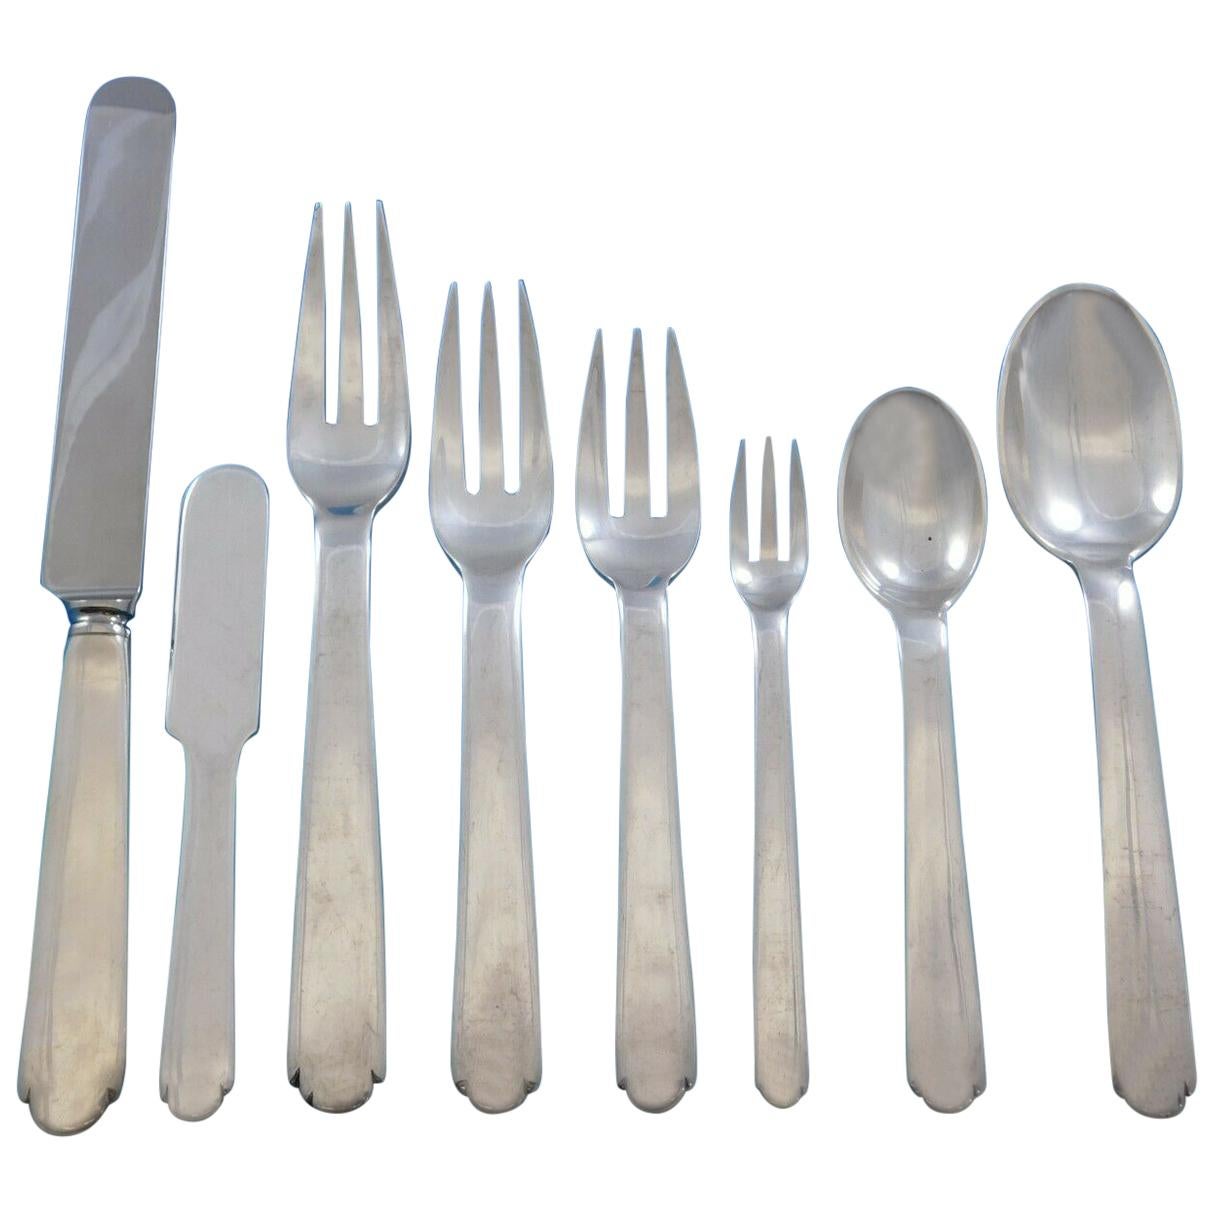 Louis C by Old Newbury Crafters Sterling Silver Flatware Set Service 99p Cartier